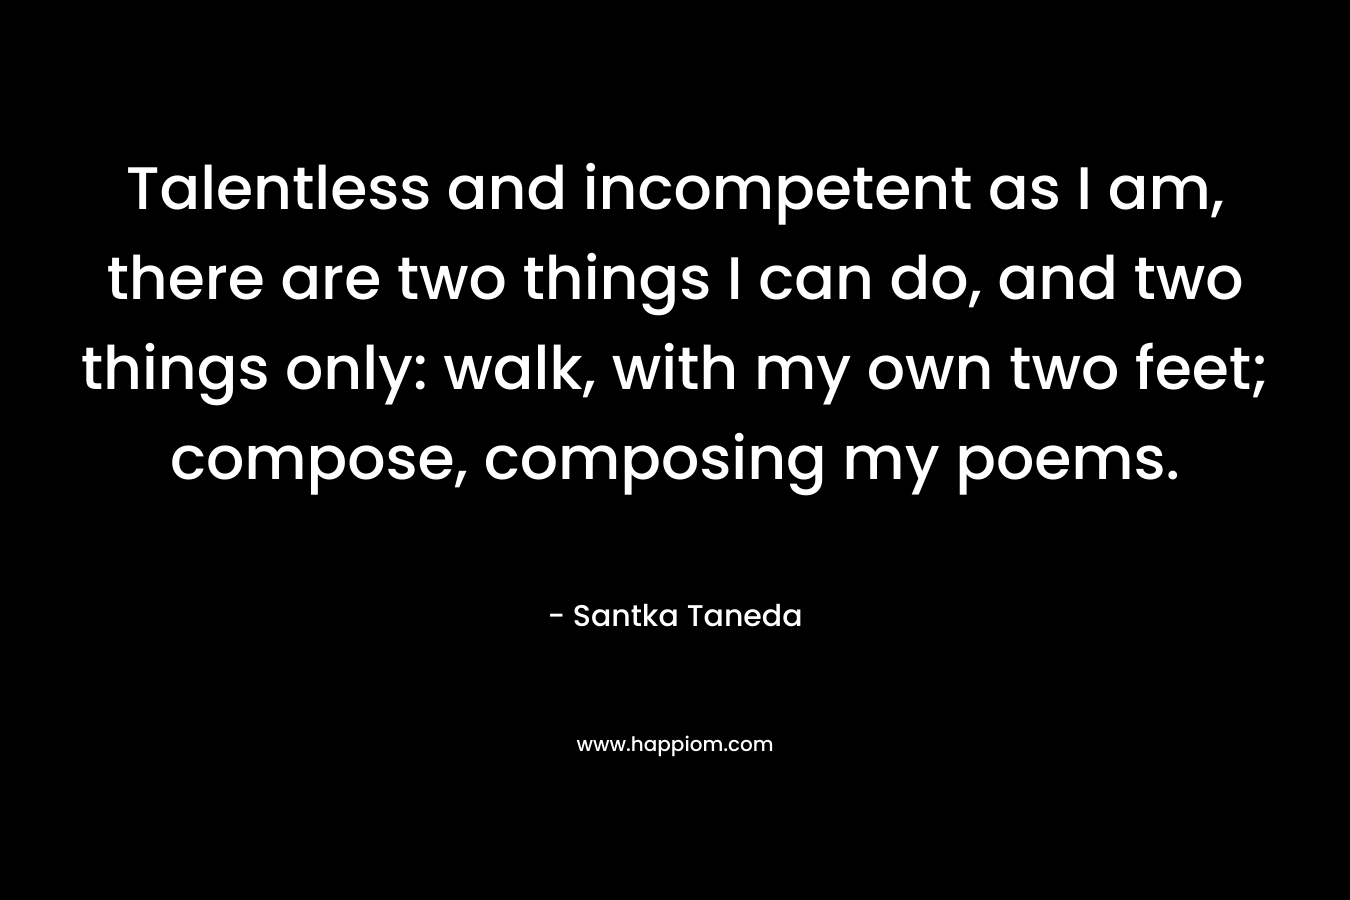 Talentless and incompetent as I am, there are two things I can do, and two things only: walk, with my own two feet; compose, composing my poems. – Santka Taneda